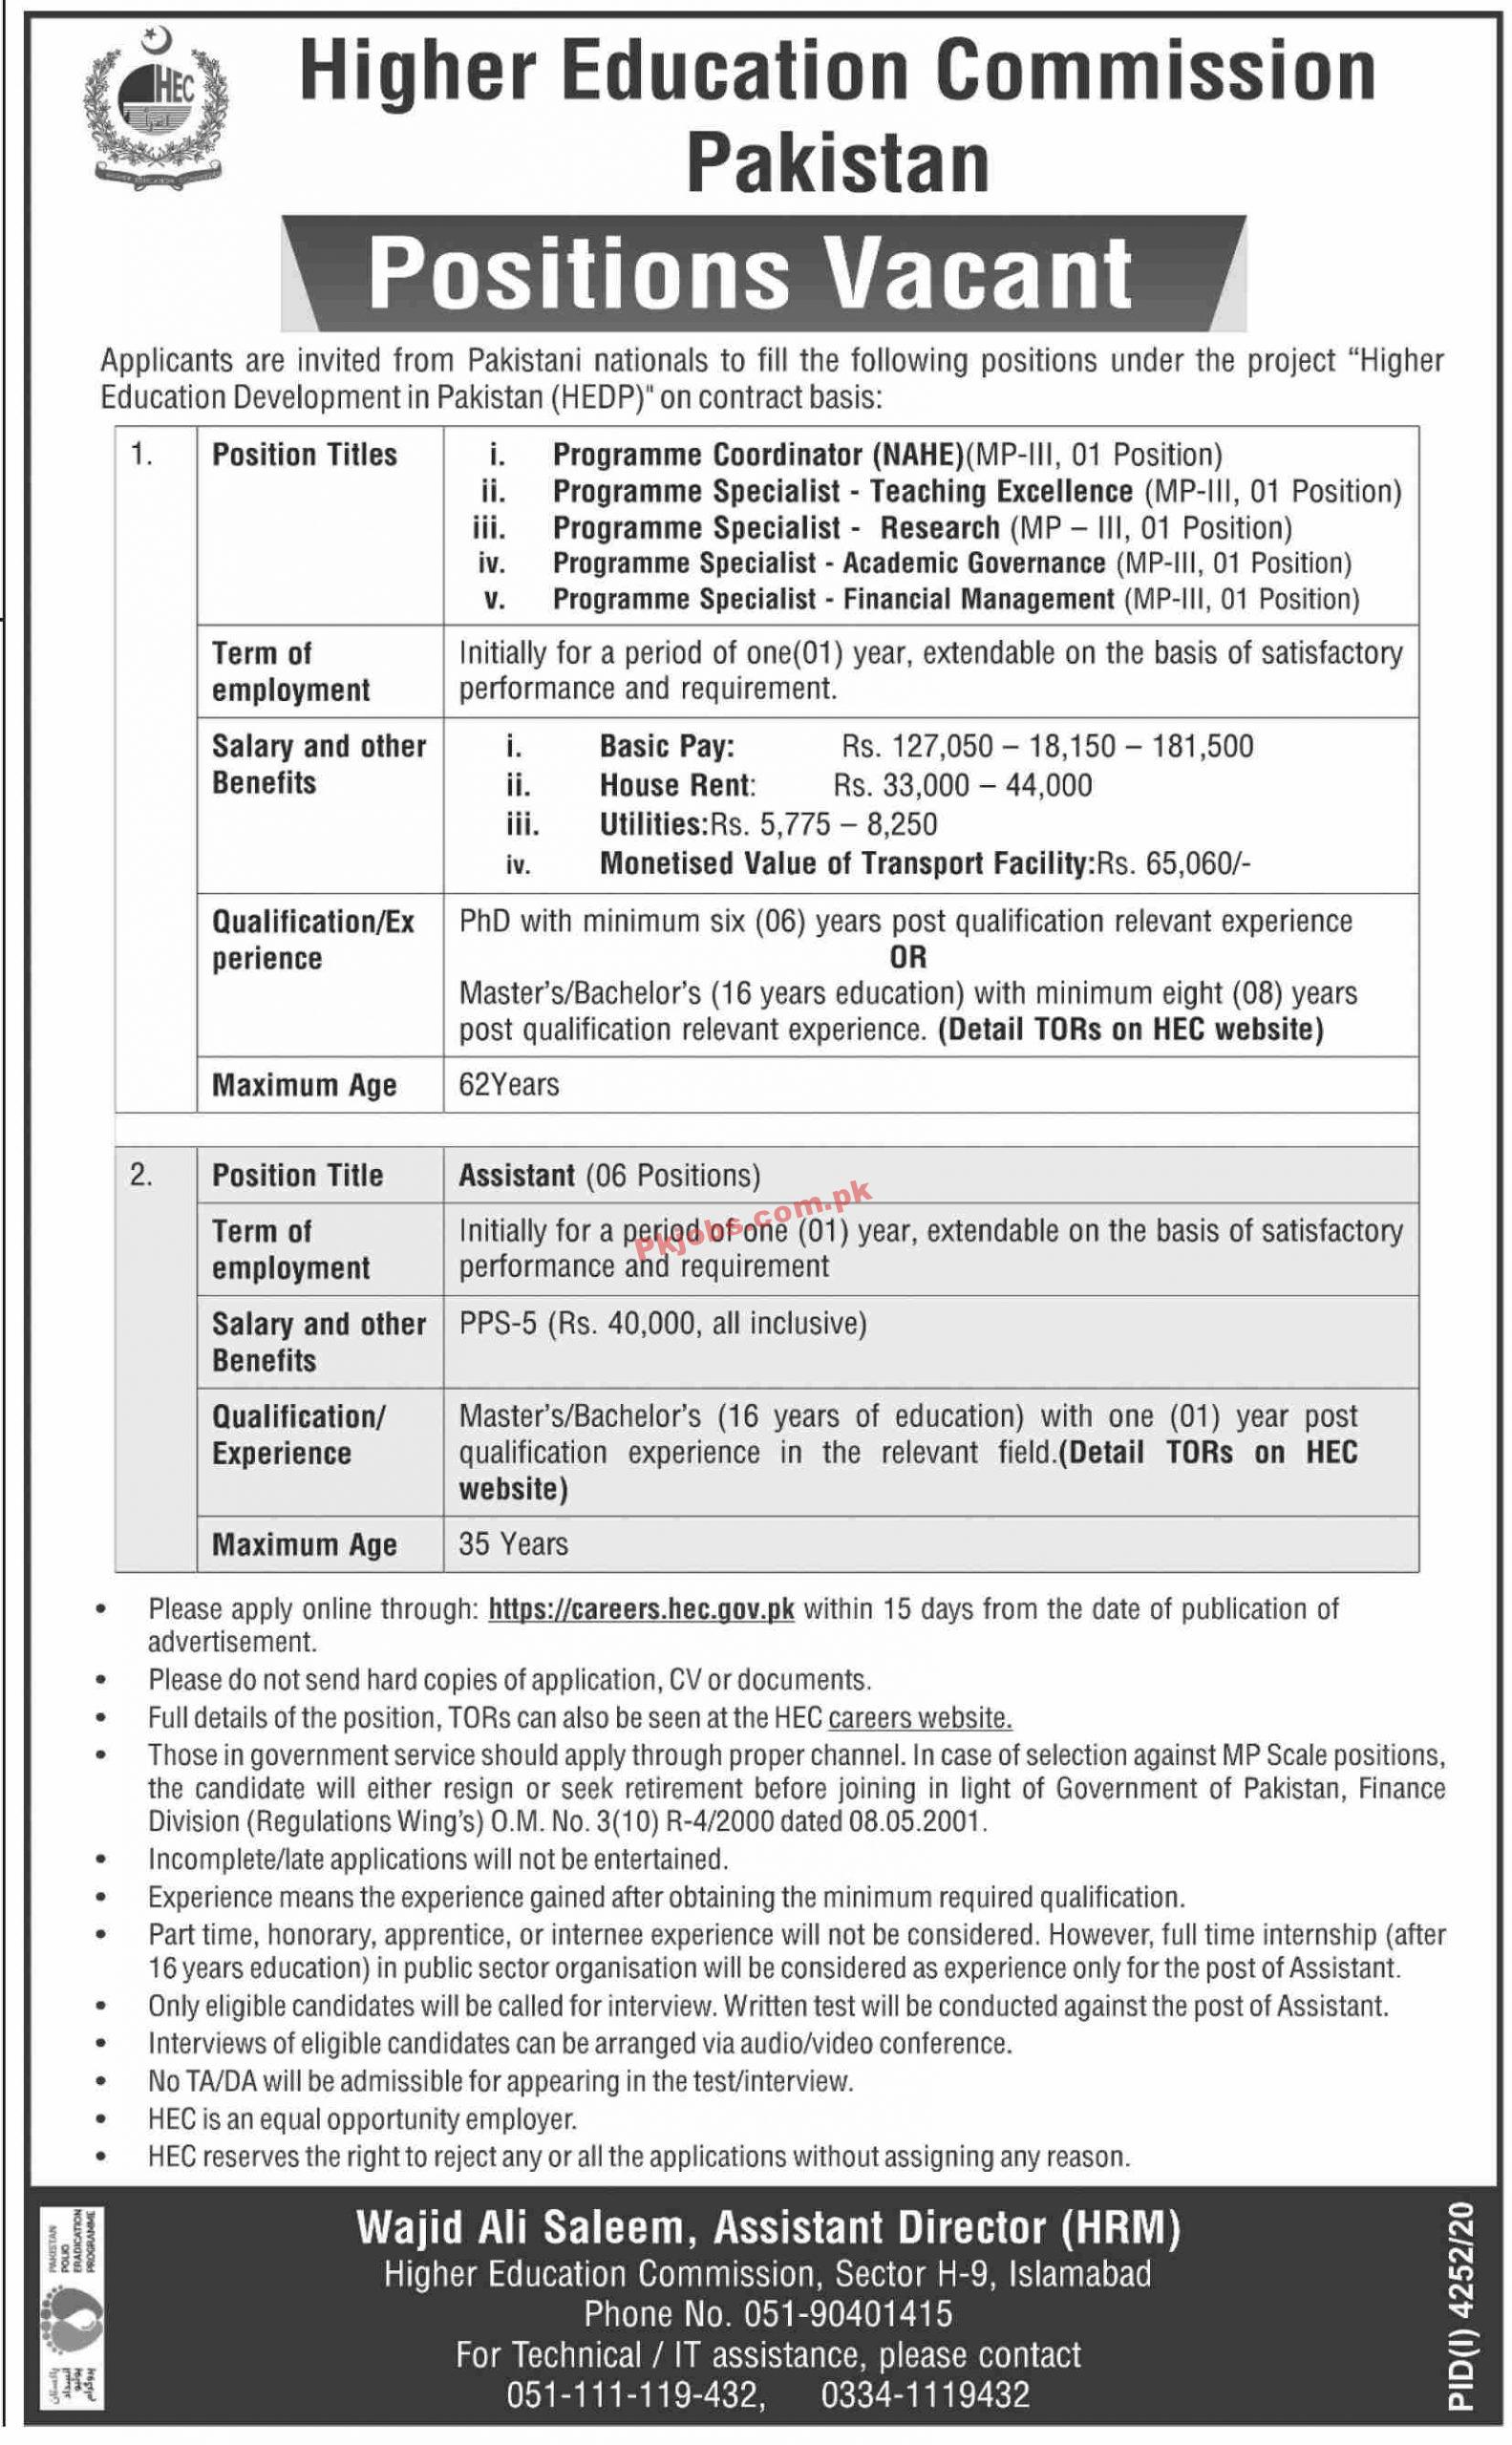 Jobs in Higher Education Commission Pakistan